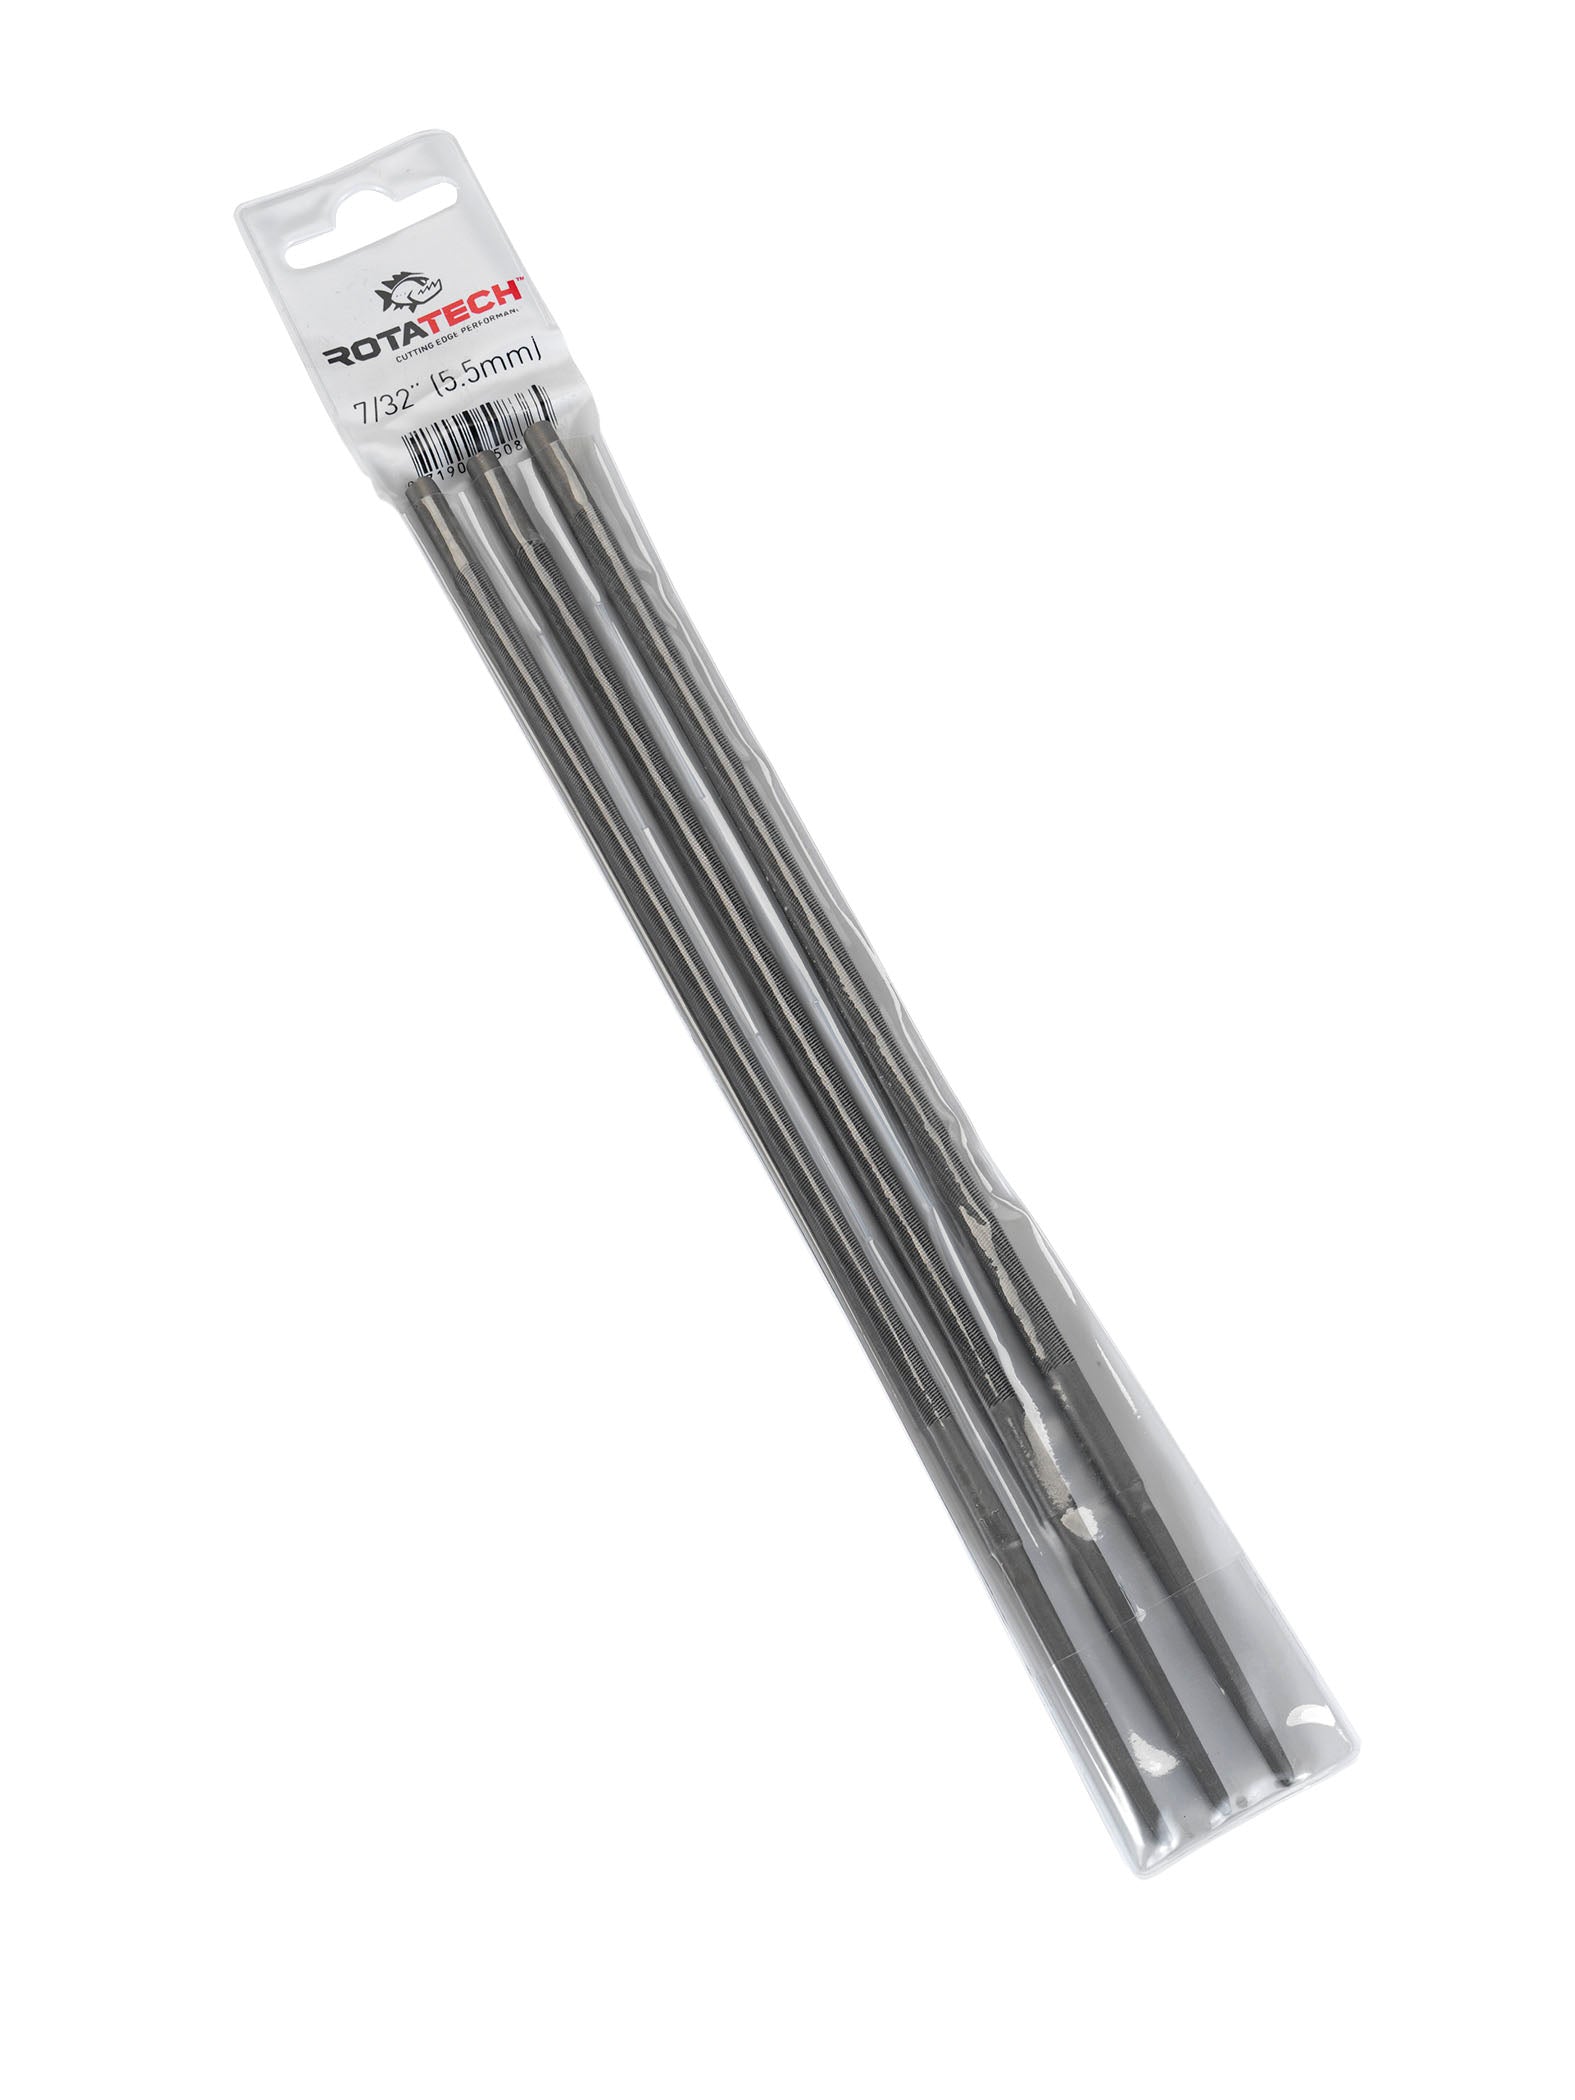 11/64" Round Chainsaw Files Pack Of 3 - Rotatech 